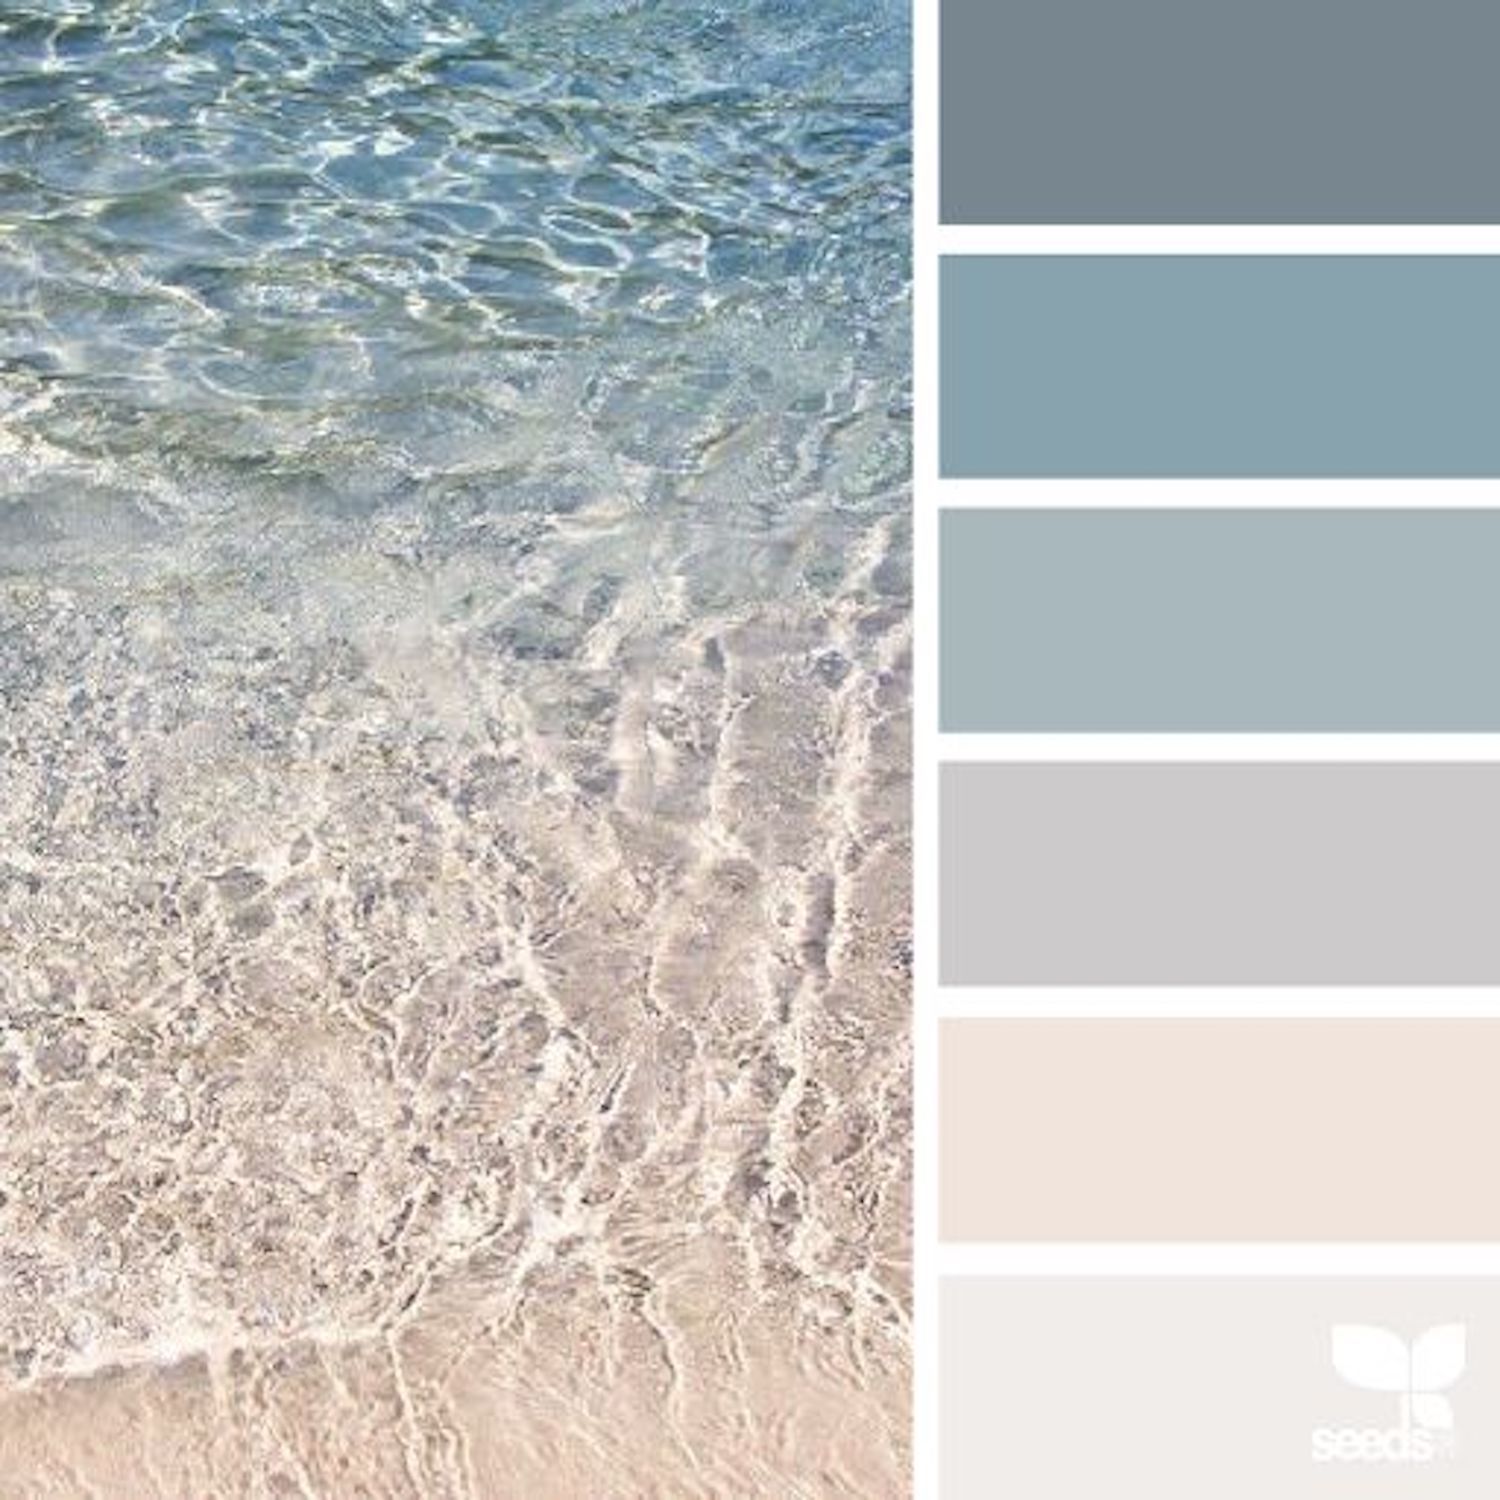 We’re loving coastal color schemes right now! Check out these beautiful shades from Design Seeds that are perfect for any decor.